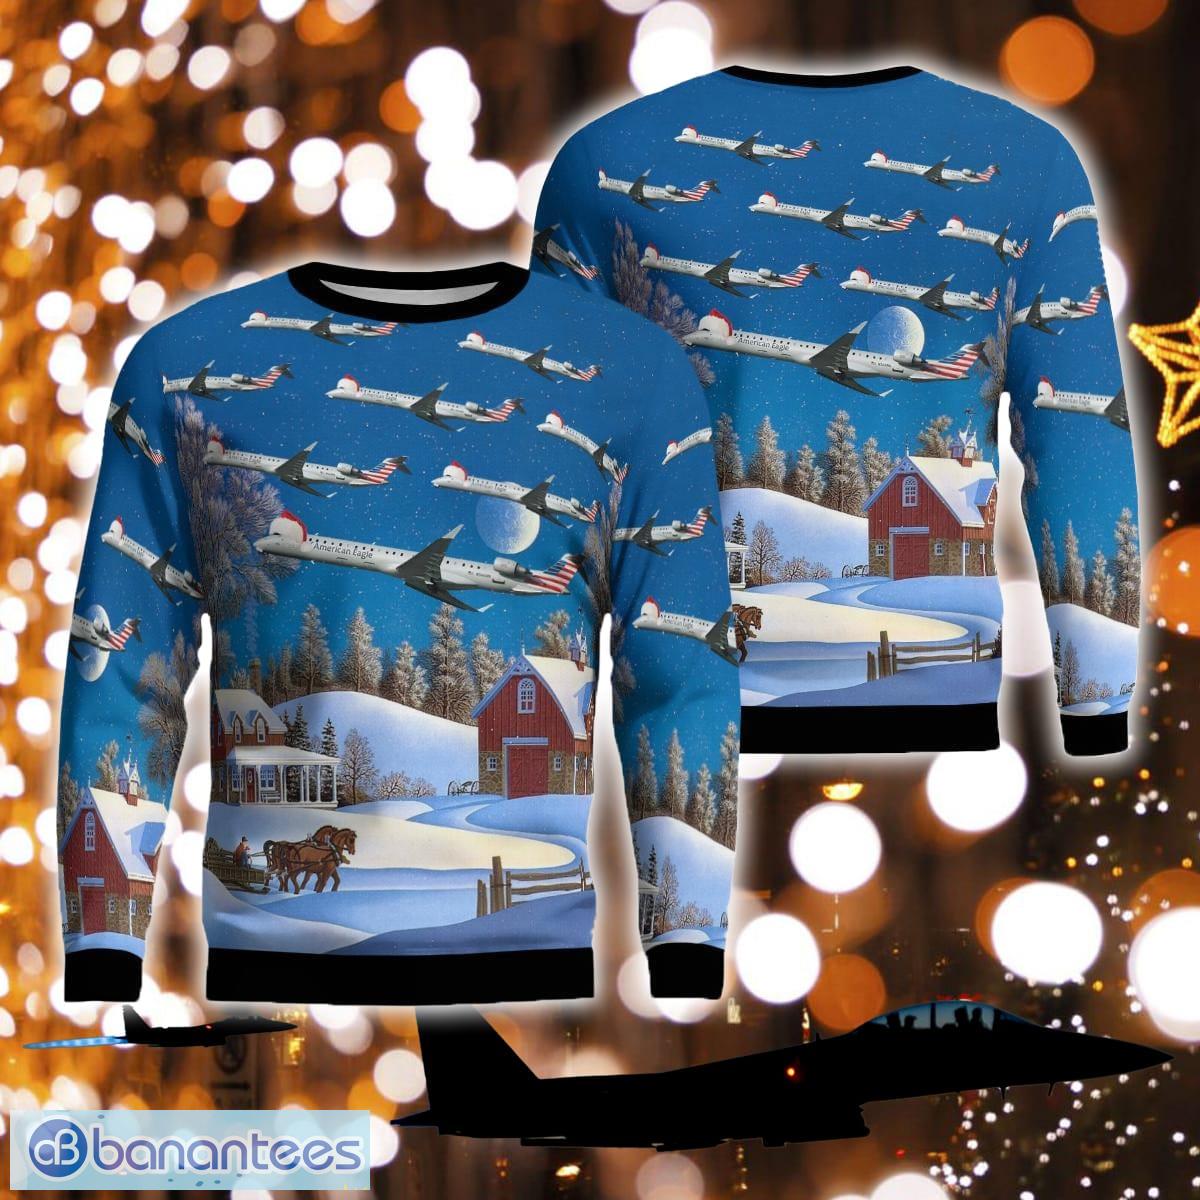 PSA Airlines Bombardier CRJ900 Ugly Xmas Sweater - PSA Airlines Bombardier CRJ900 Ugly Christmas Sweater Photo 1